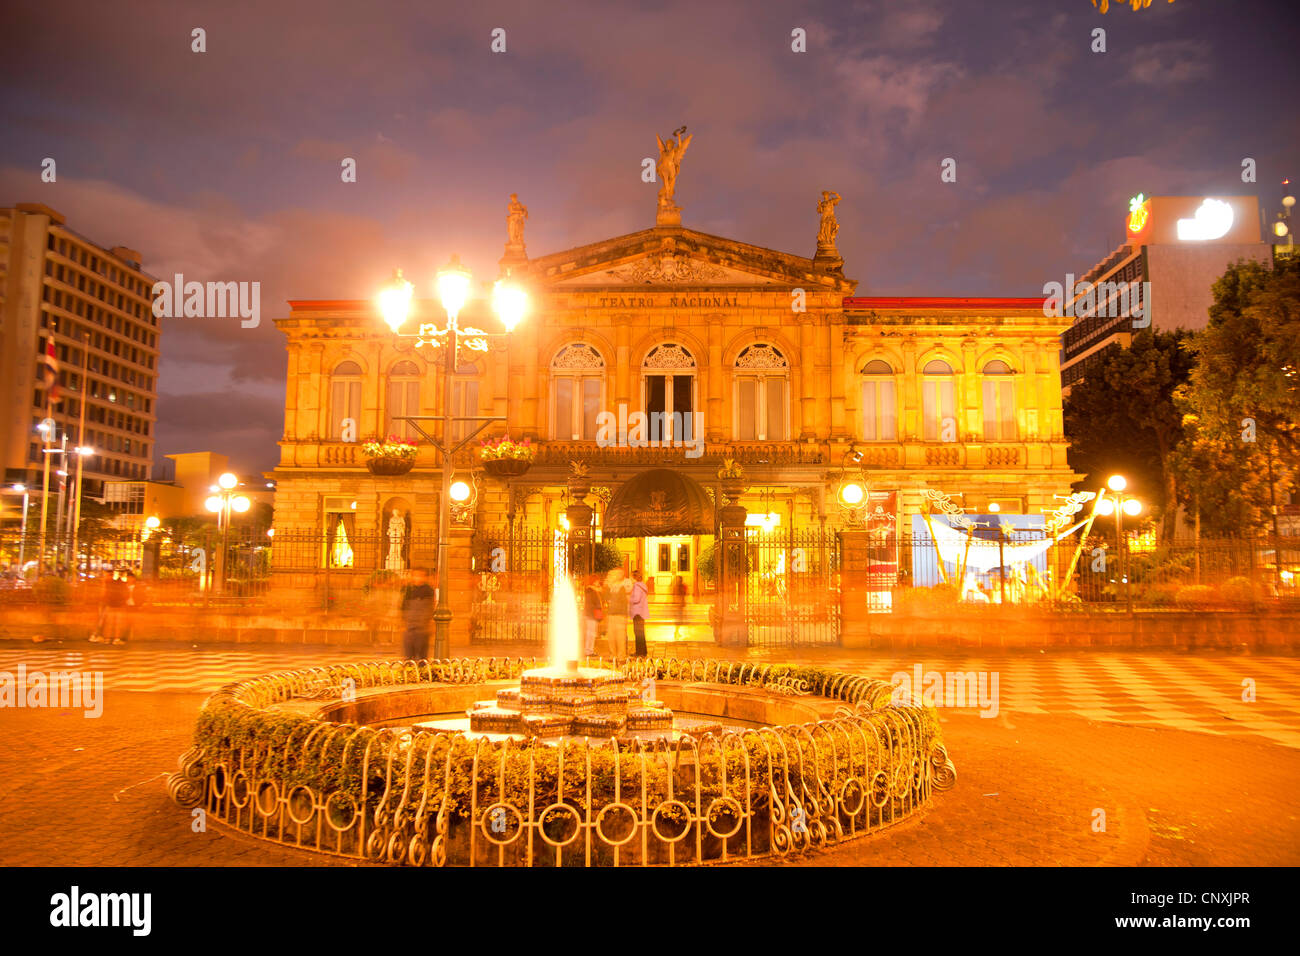 the national theater Teatro Nacional in the capital San Jose at night, Costa Rica, Central America Stock Photo